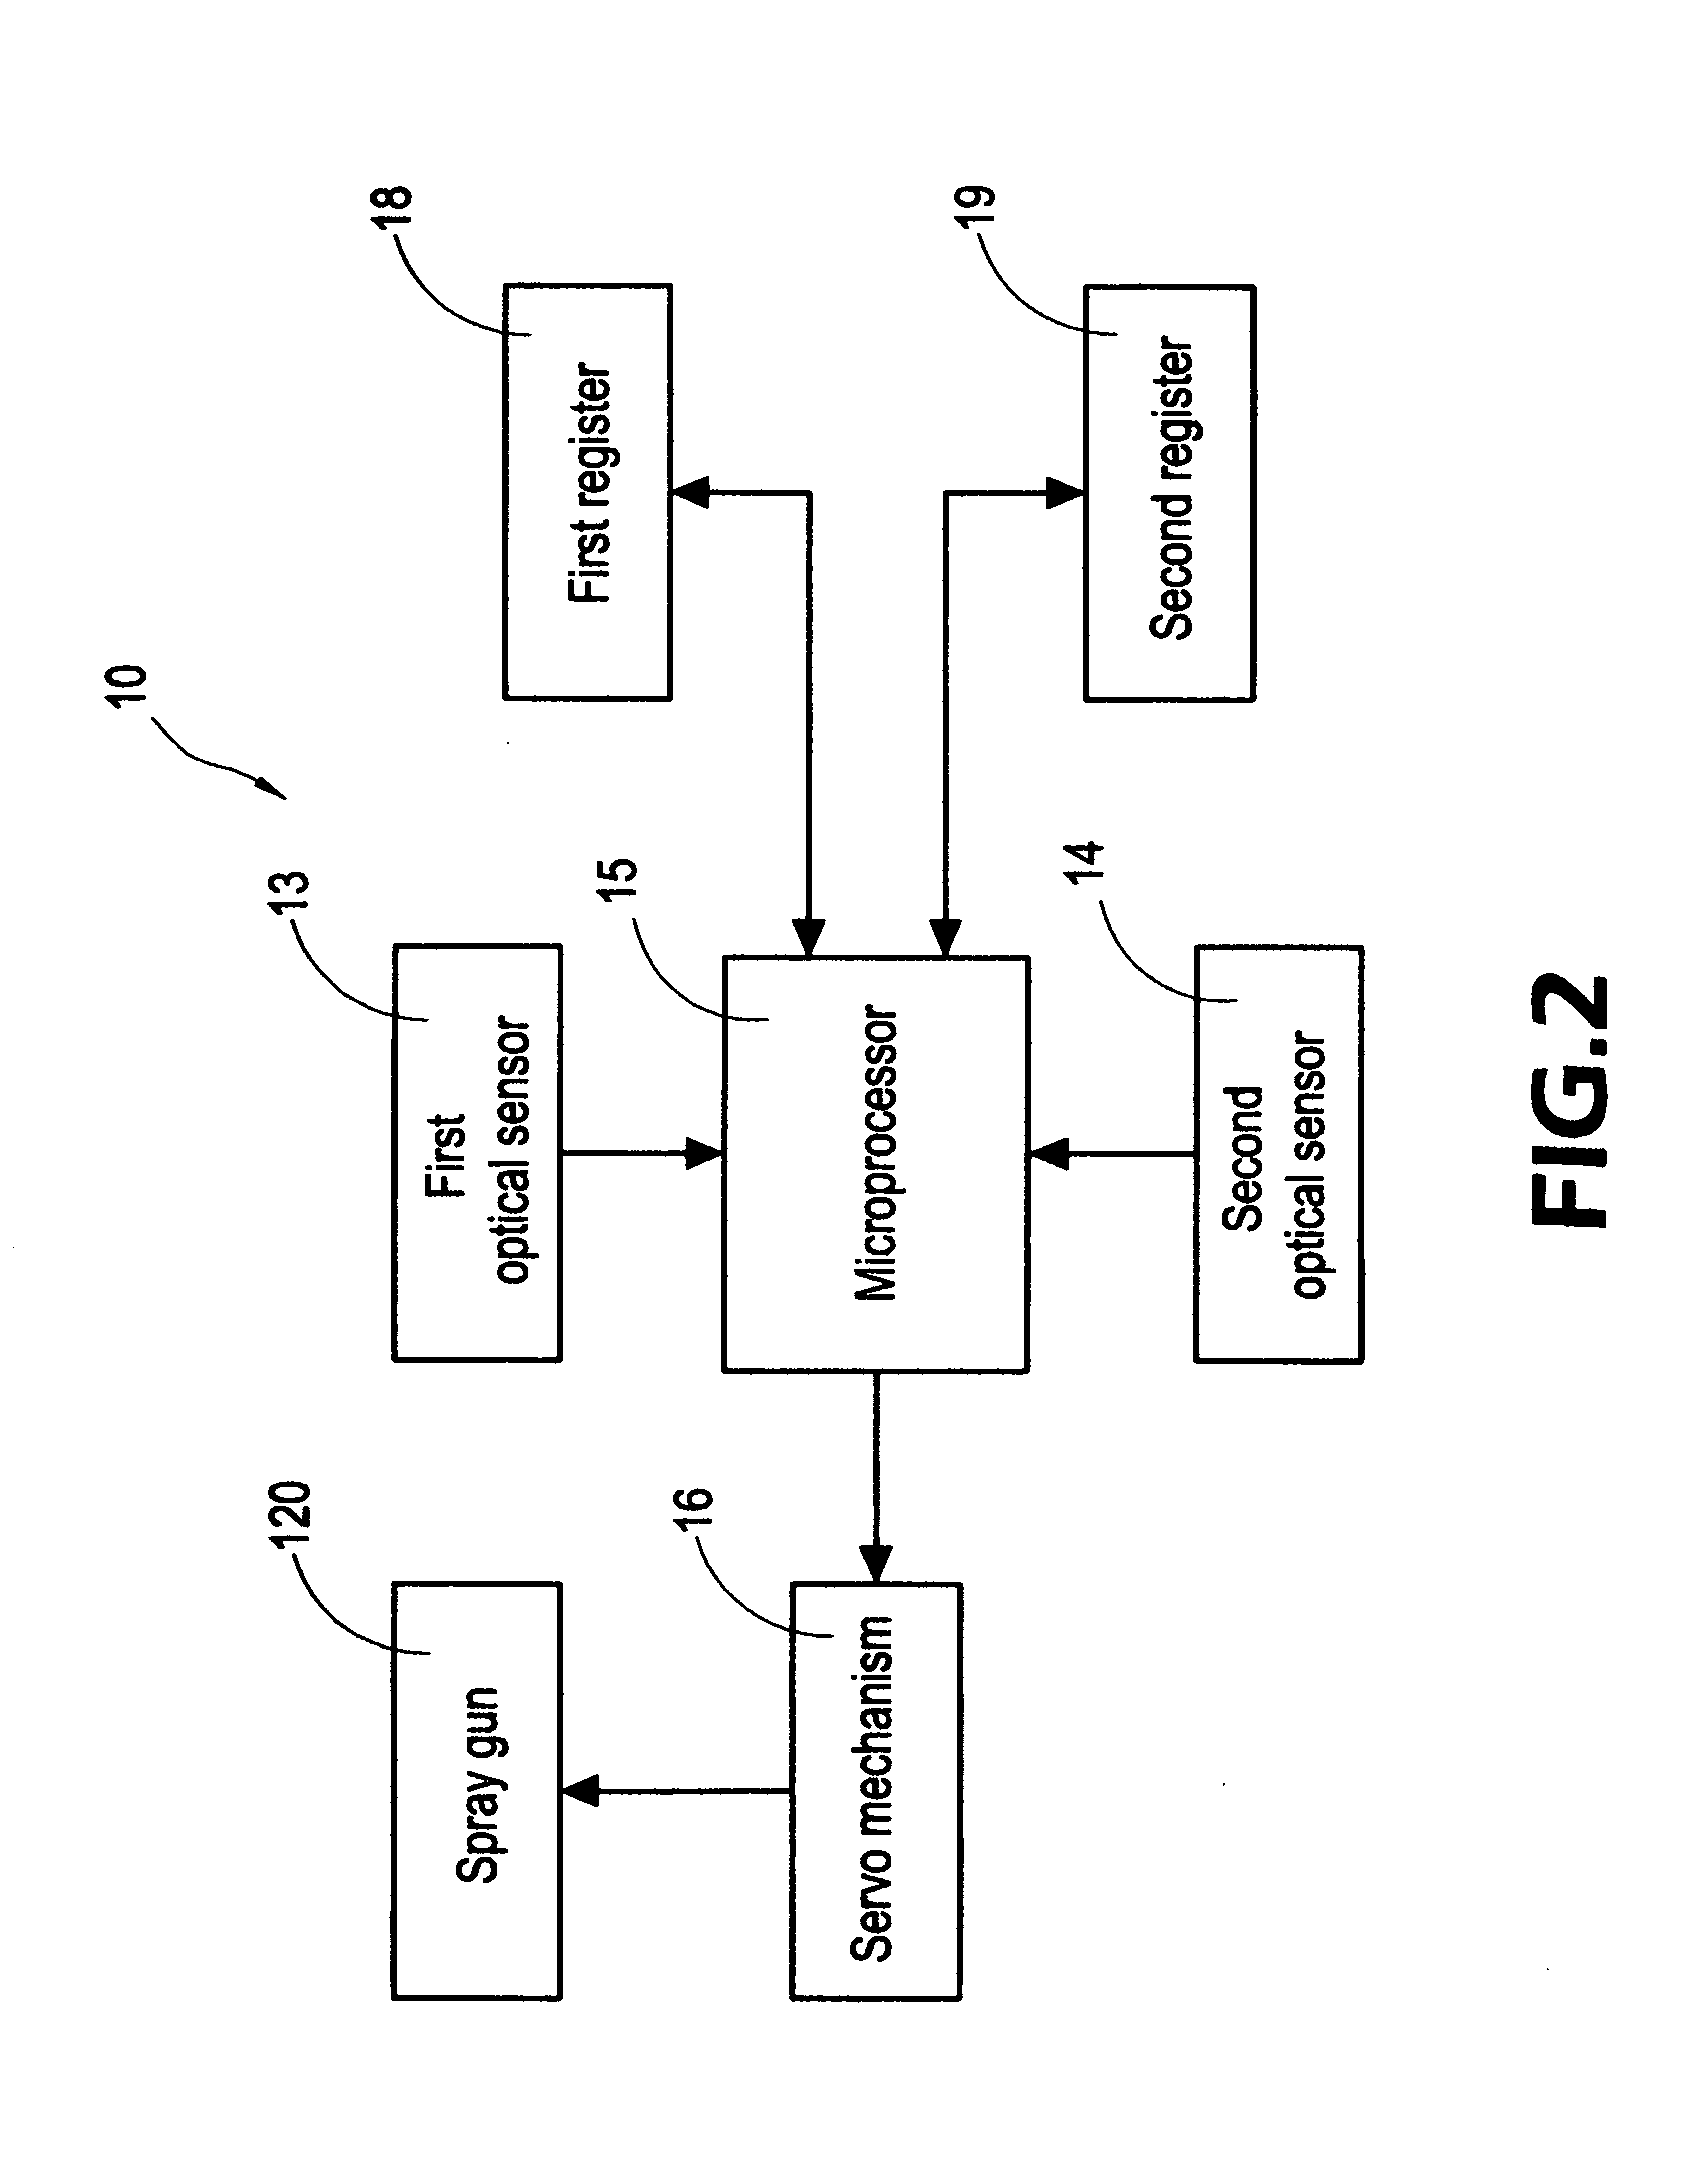 Automatic spraying method for flux of wave solder oven